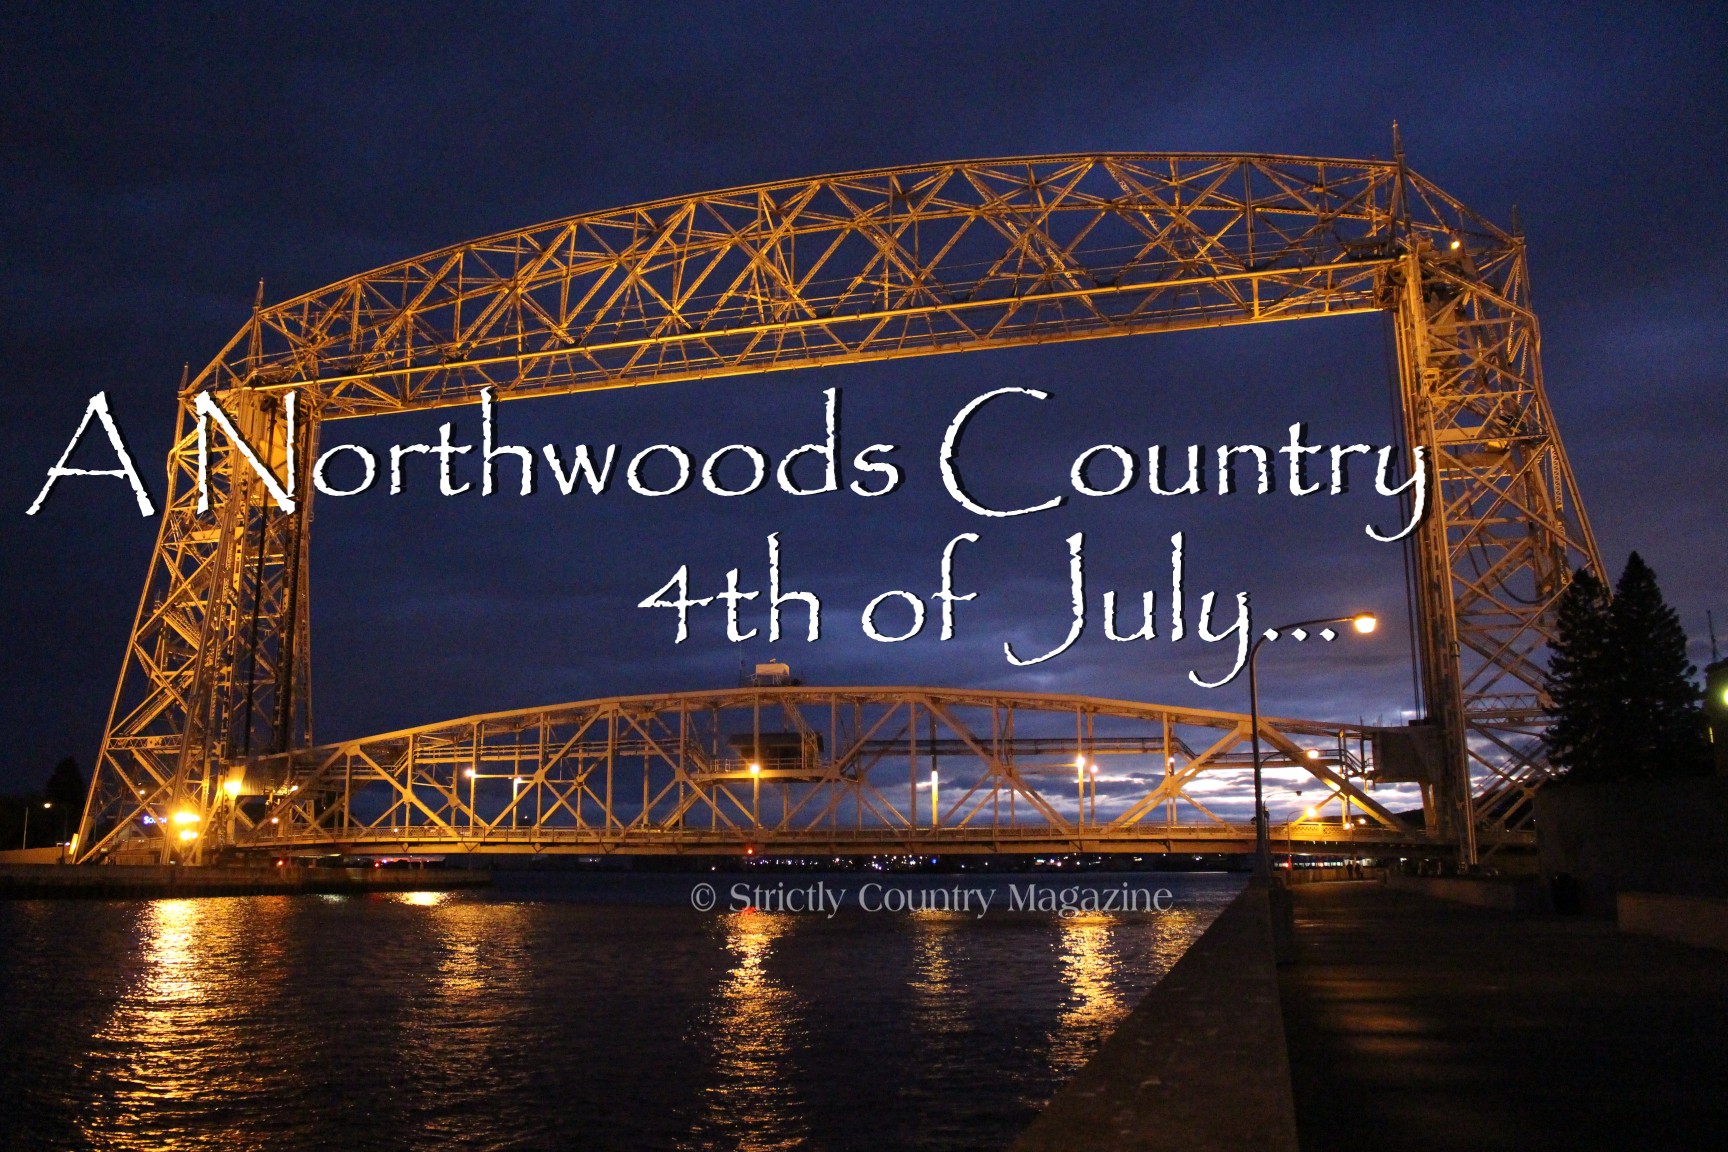 Strictly Country Magazines copyright A Northwoods Country 4th of July title